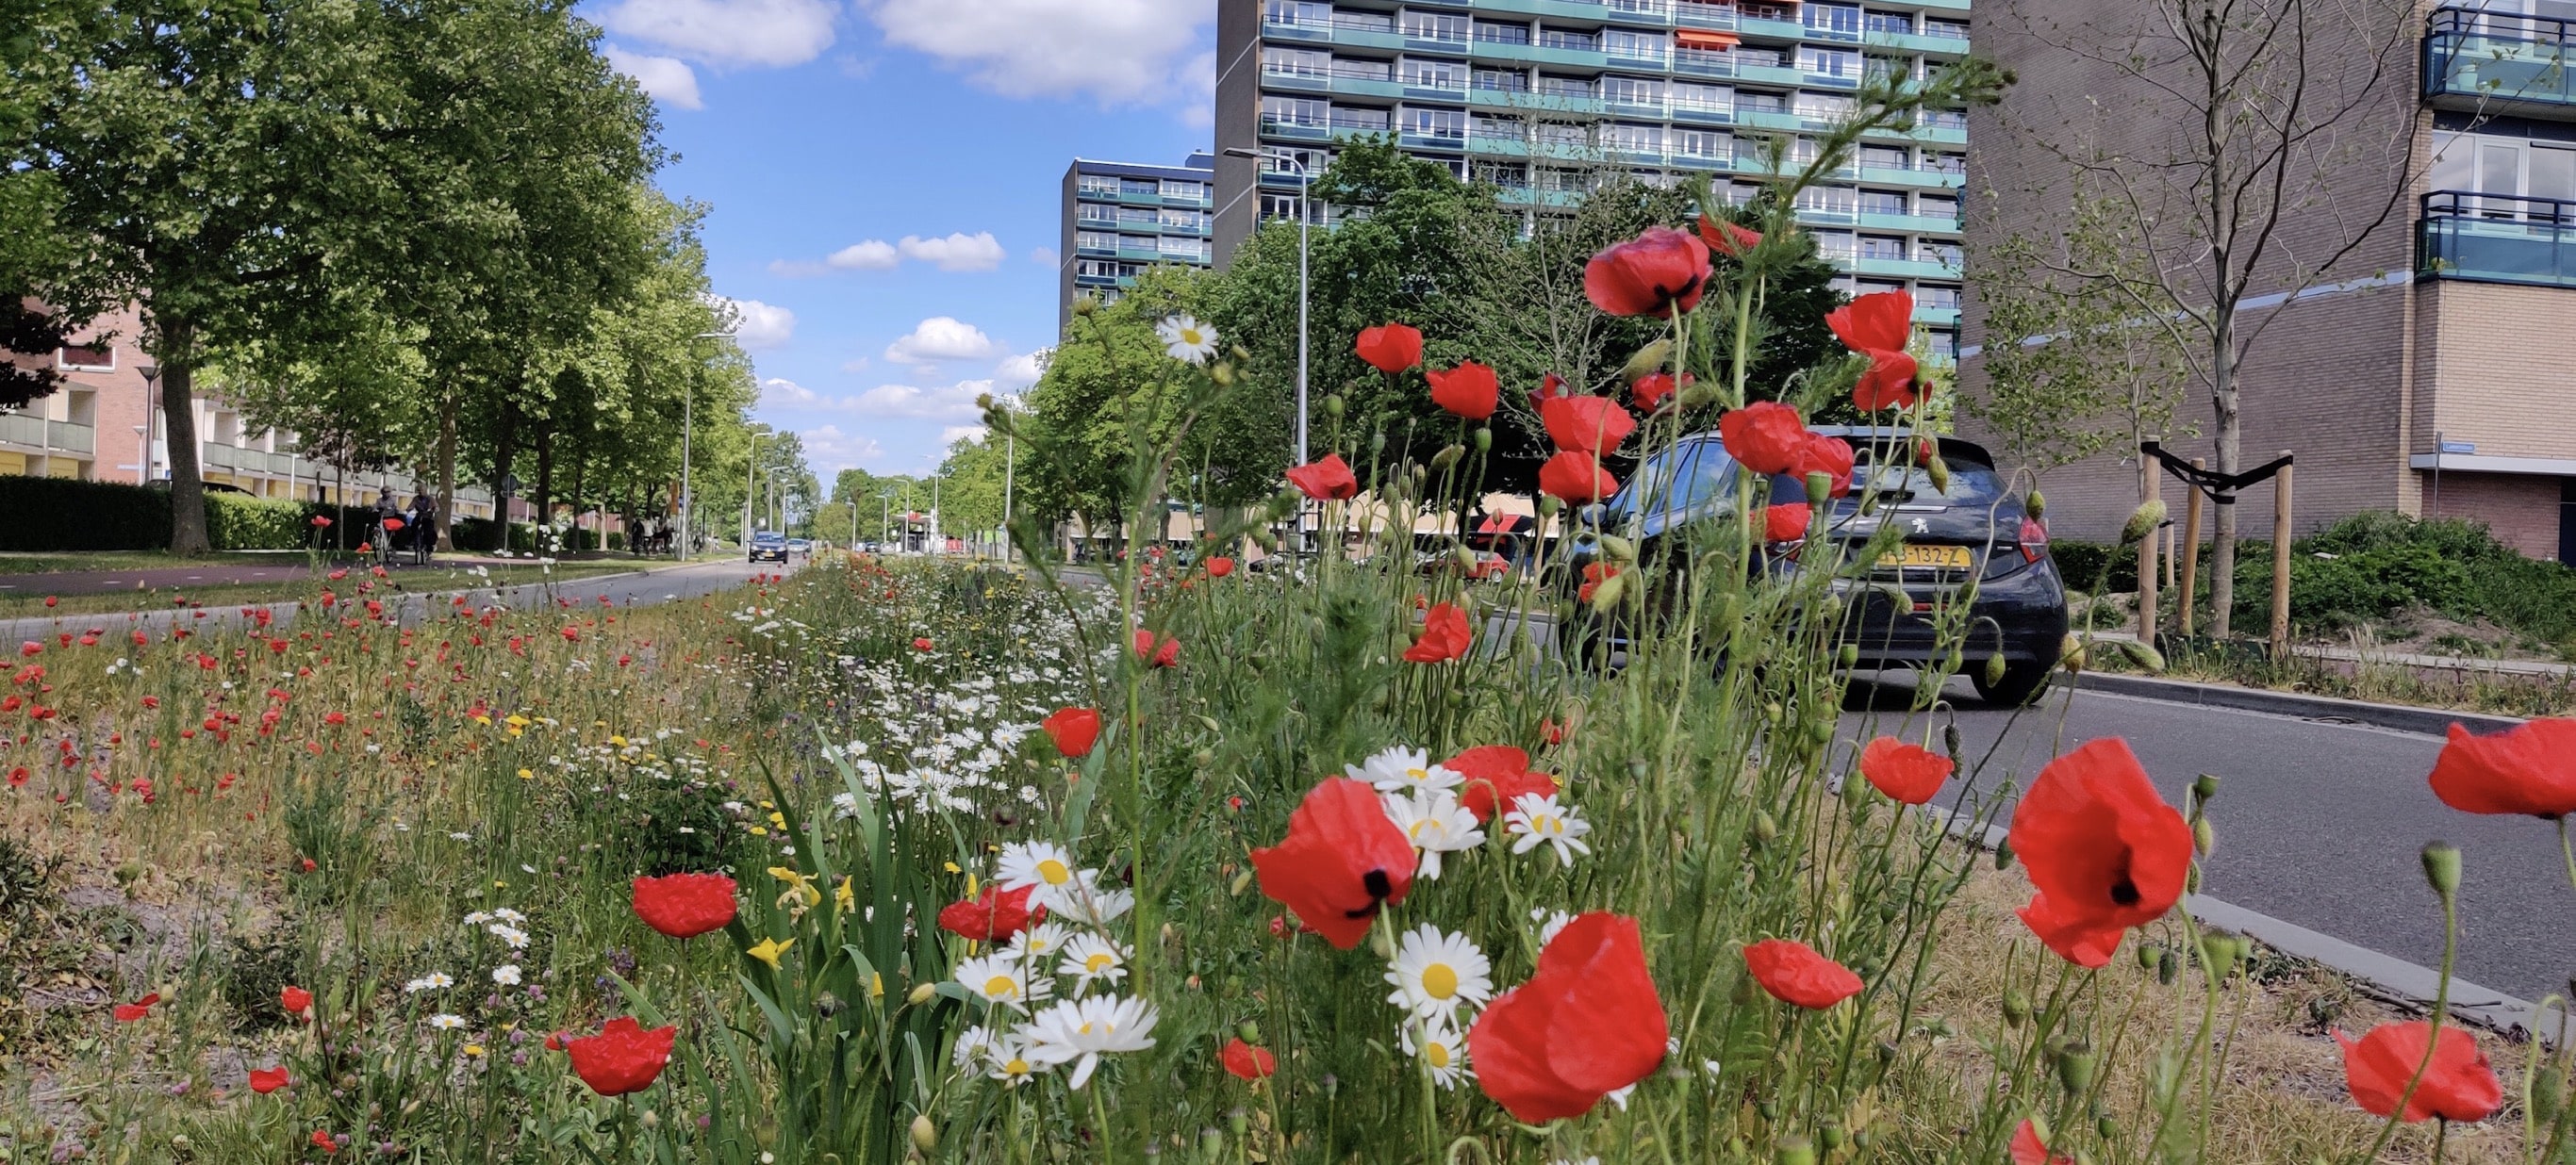 UTRECHT - Cities must hurry to take action against the increasing flooding. According to engineer Tim van Hattum of the university in Wageningen, municipalities need to be redesigned to absorb so-called peak showers. Flower beds are only one solution.